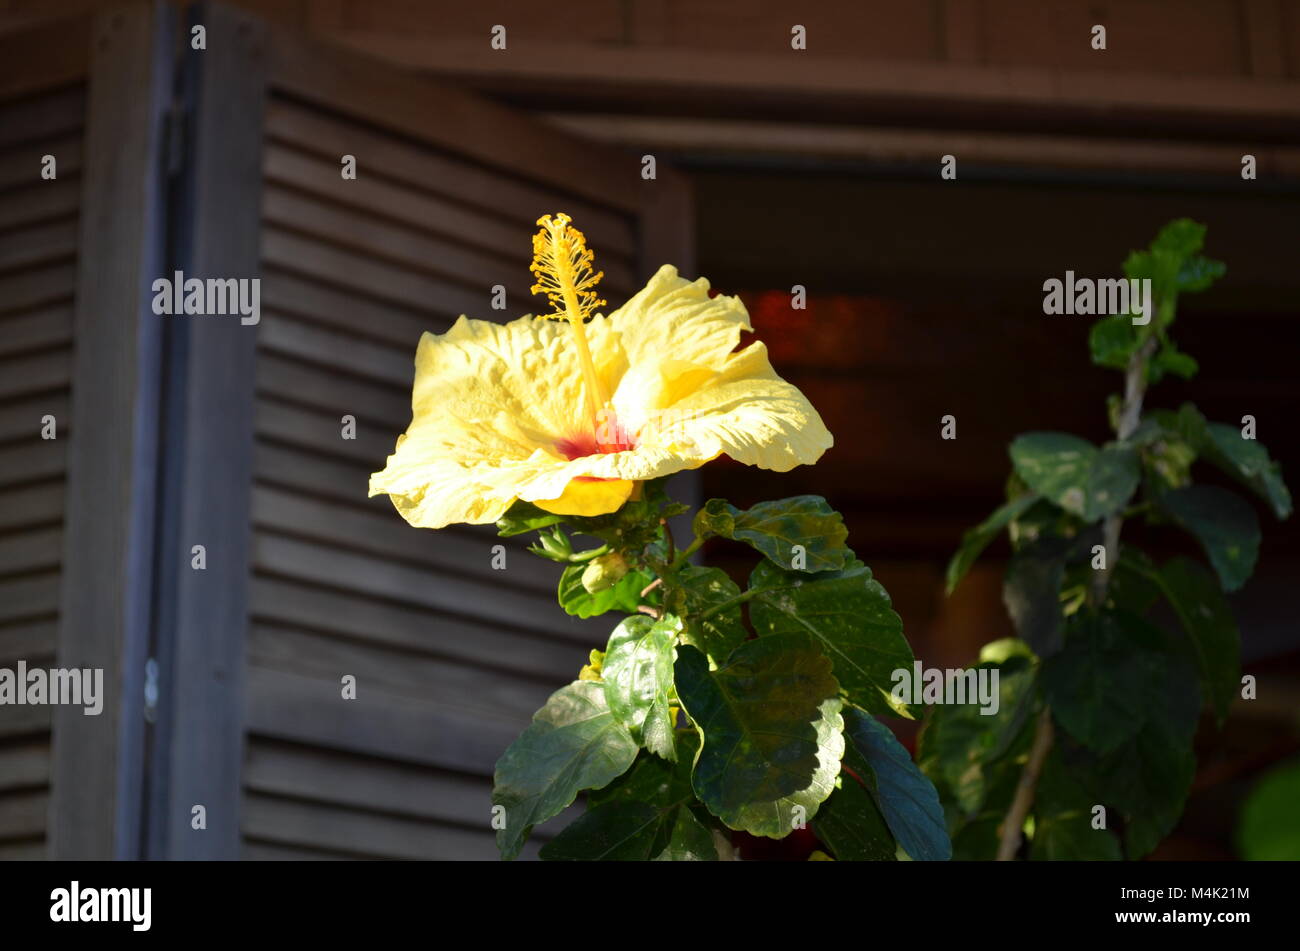 A stunning yellow Hibiscus, blooms just outside of a window with wooden shutters, on a beautiful hot tropical day in Hawaii Stock Photo